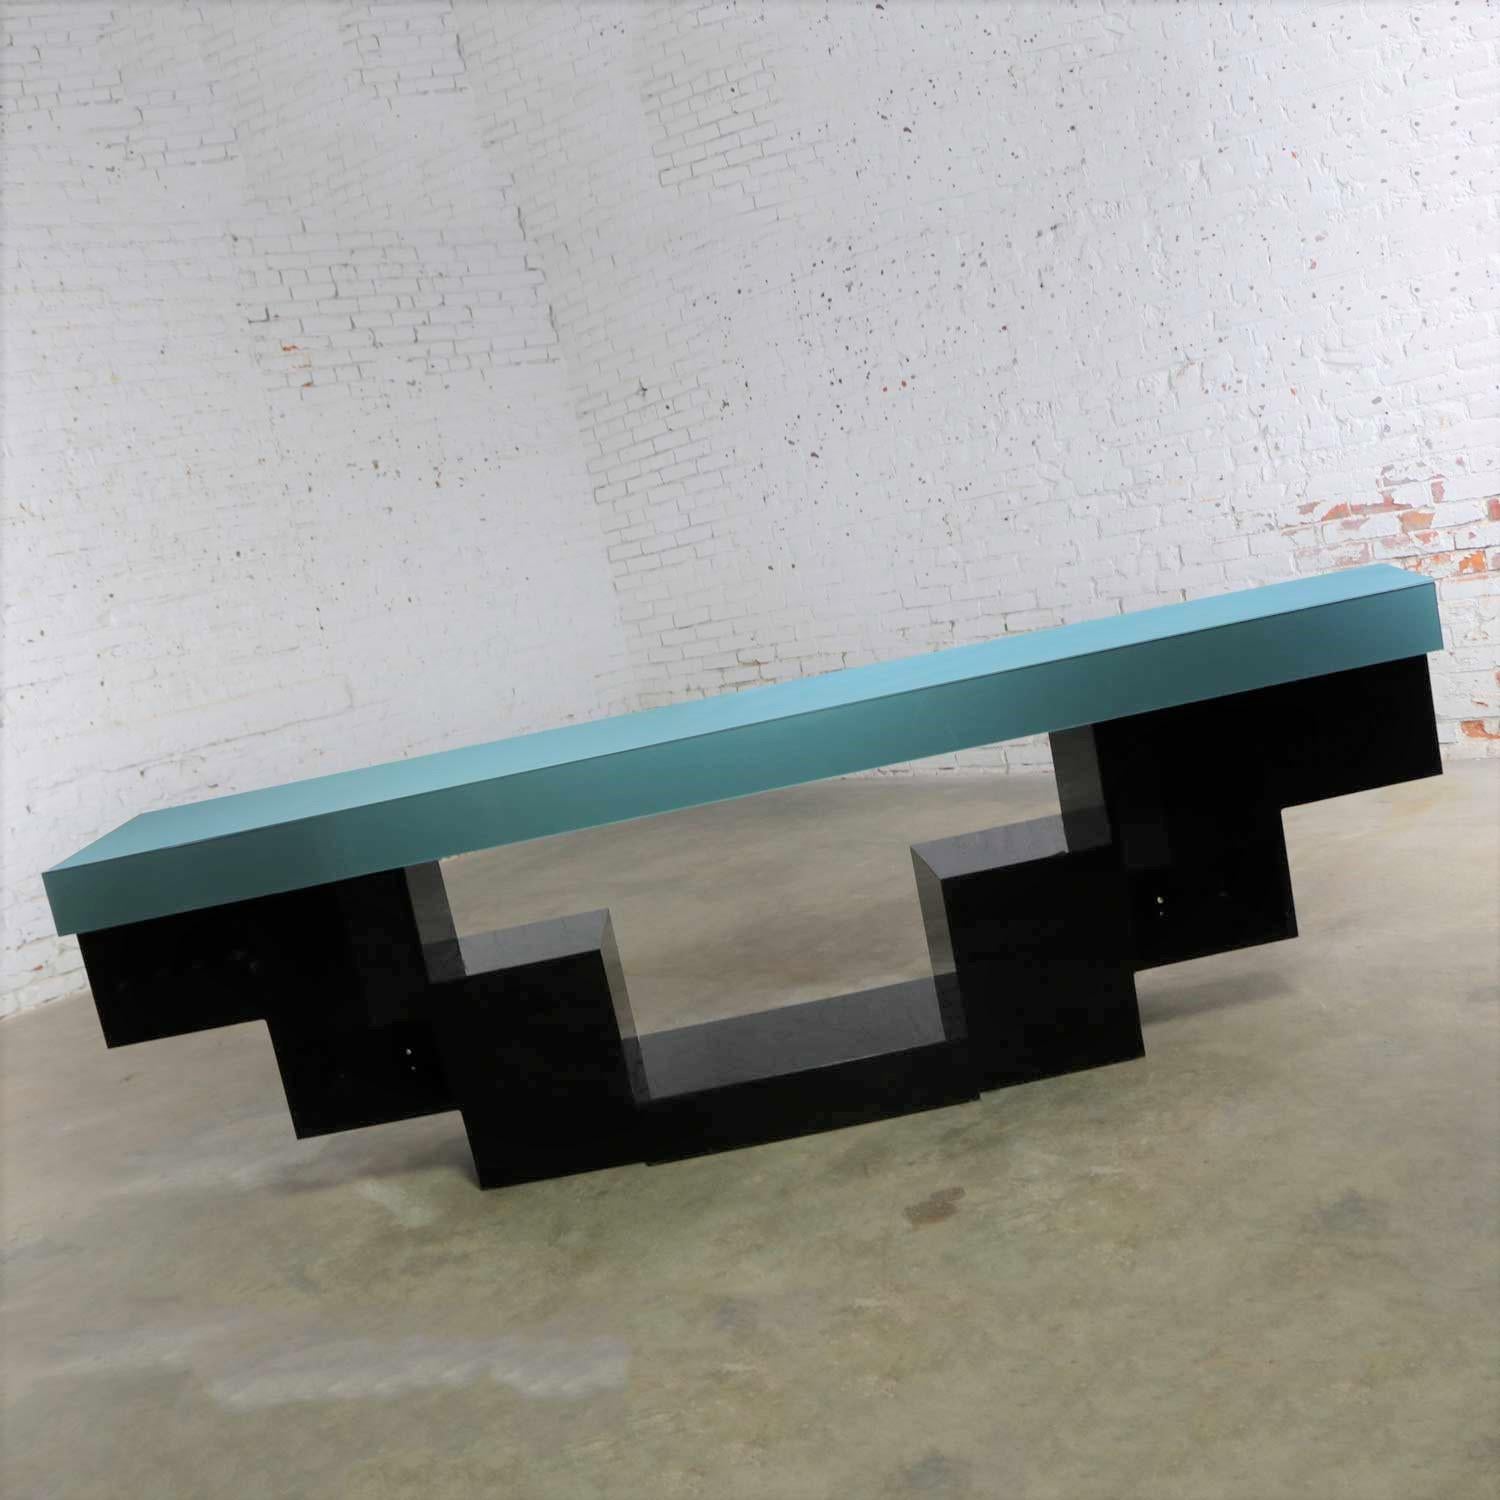 Handsome modern console table or credenza with a zig-zag or stepped profile and clad in black and teal plexiglass. It is in wonderful vintage condition with only normal wear and no outstanding flaws. There is a small flaw in the teal plexi on the